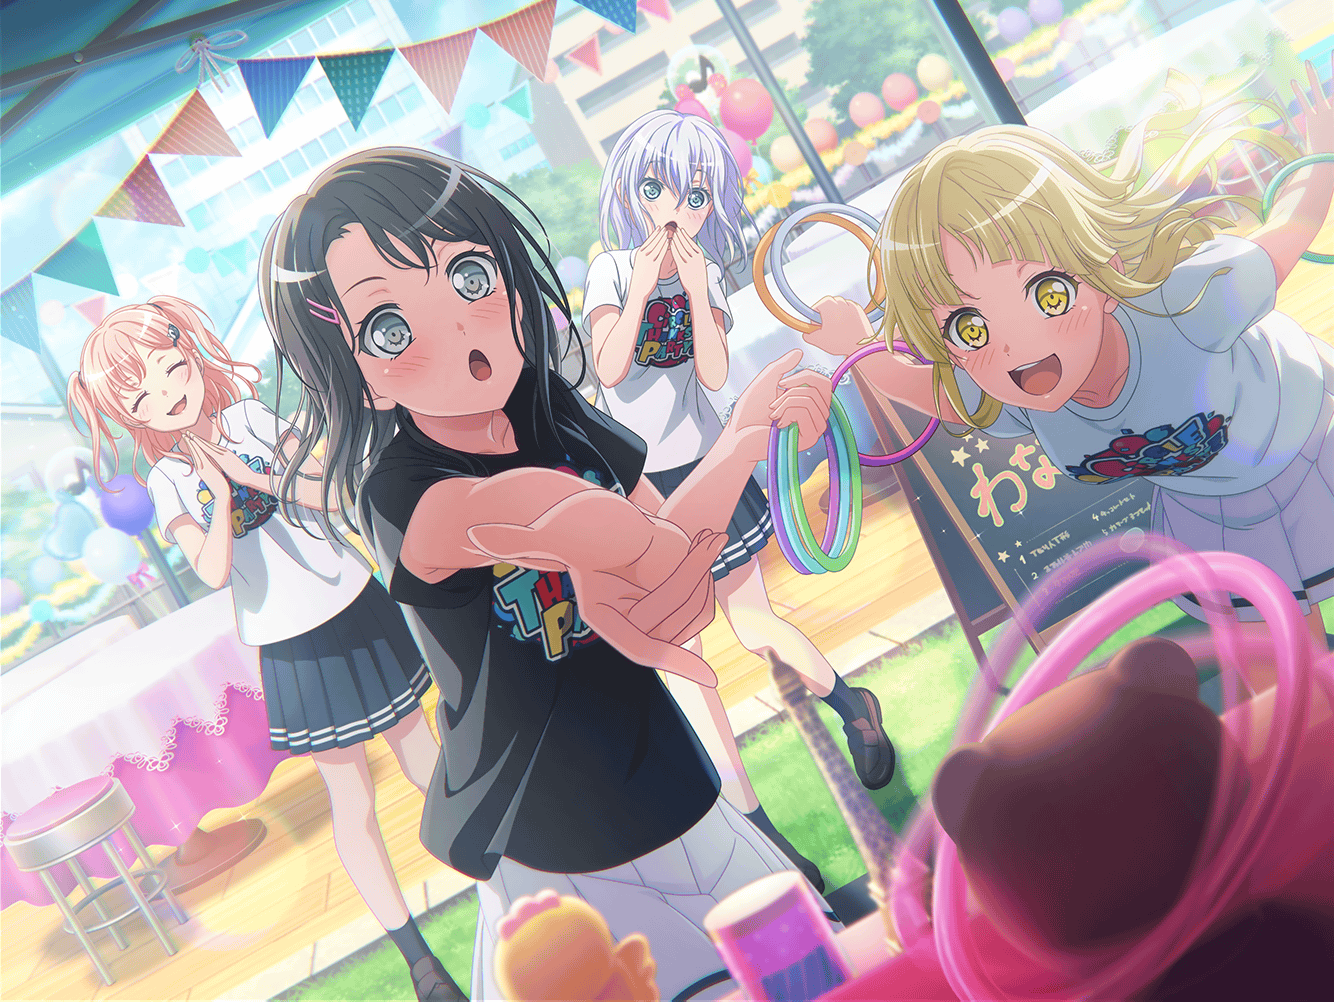 ☆ Bandori Party 🎸 on X: 🌎 During this event, you can play Pastel *  Palette's new song, Yura Yura Ring-Dong Dance! This is our first  Challenge Live event. Check our wiki